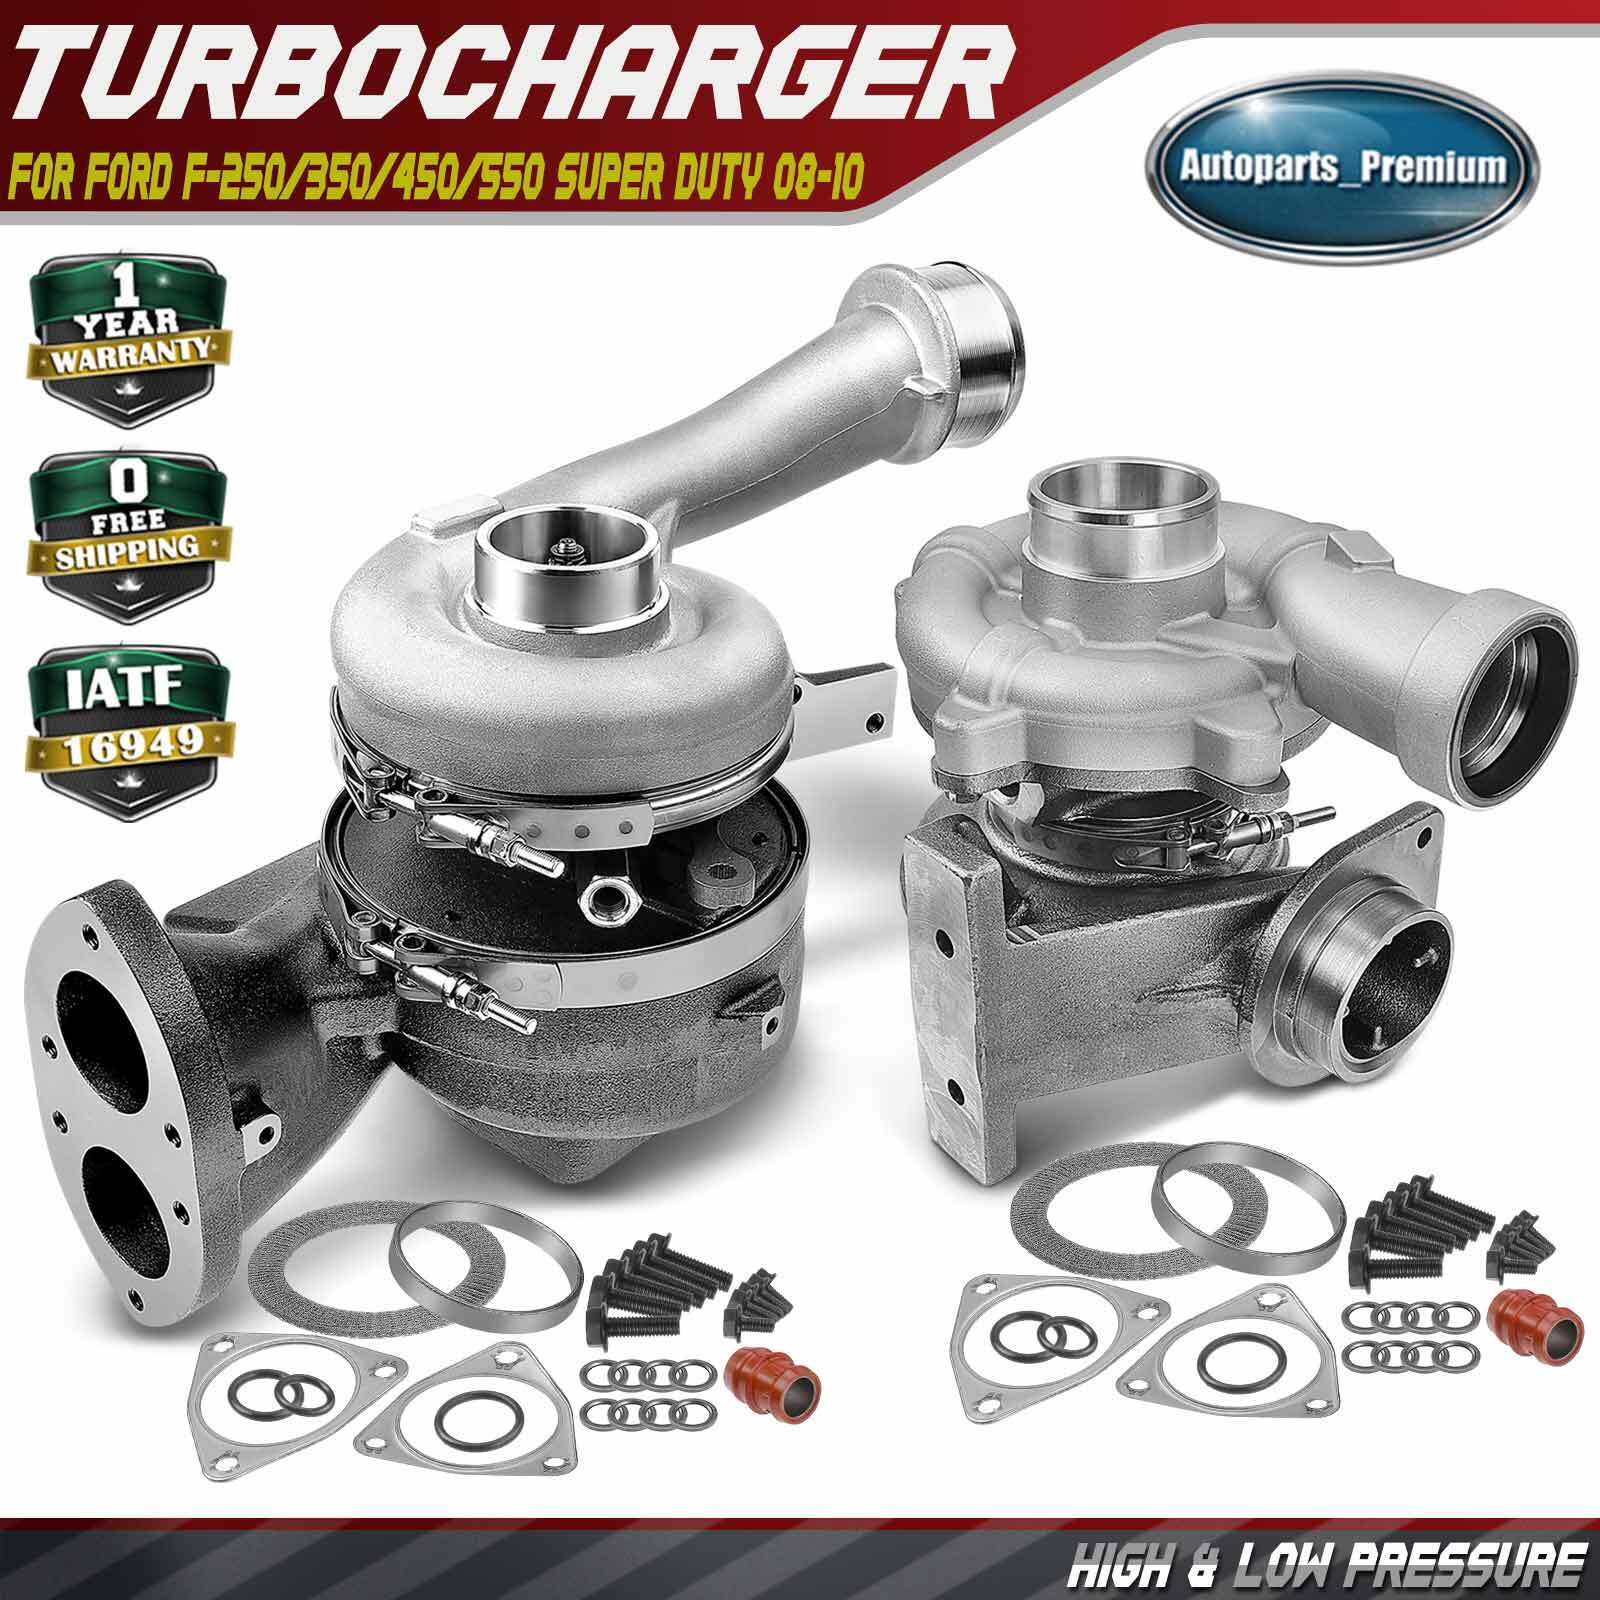 2x High & Low Pressure Turbo Turbocharger for Ford F-250 08-10 Powerstroke 6.4L